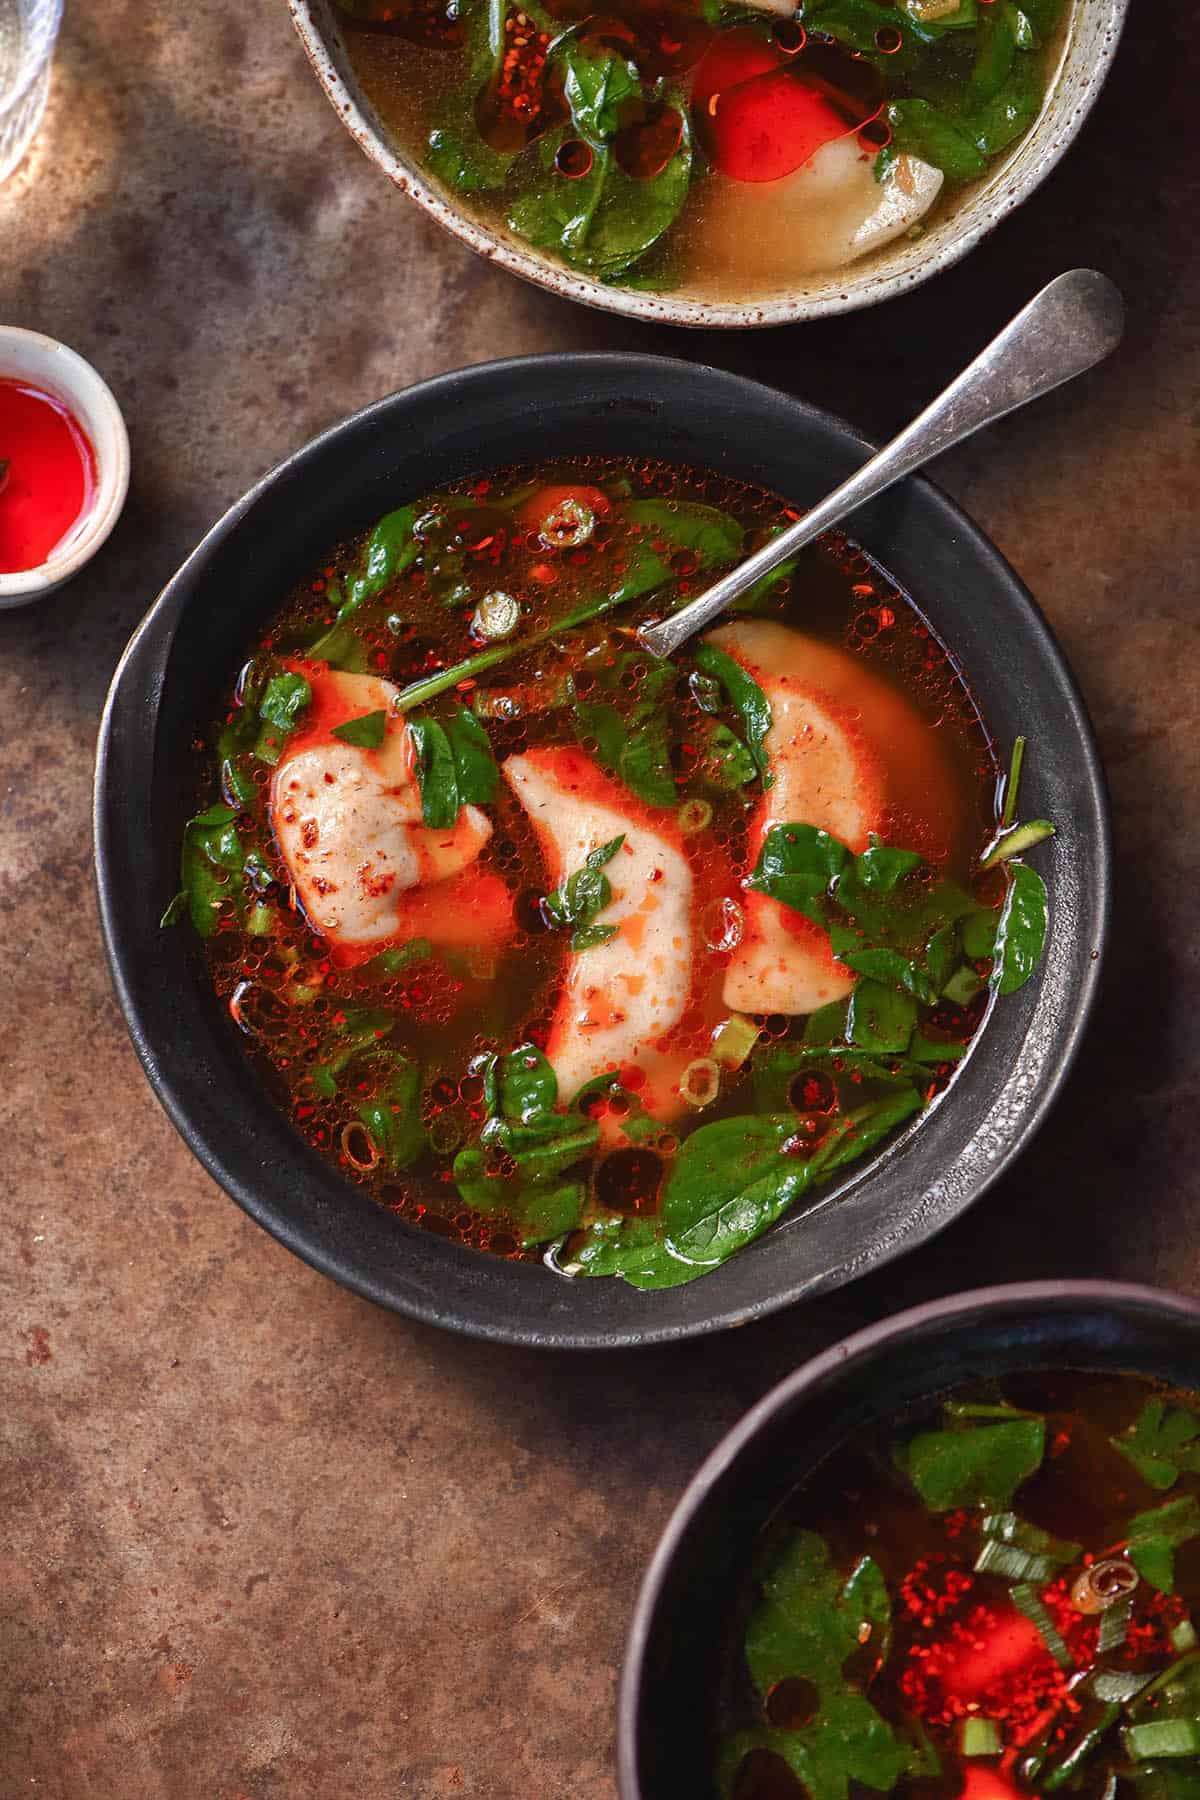 An aerial moody image of low FODMAP dumpling soup bowls on a rusty backdrop. The soup is topped with chilli oil and greens